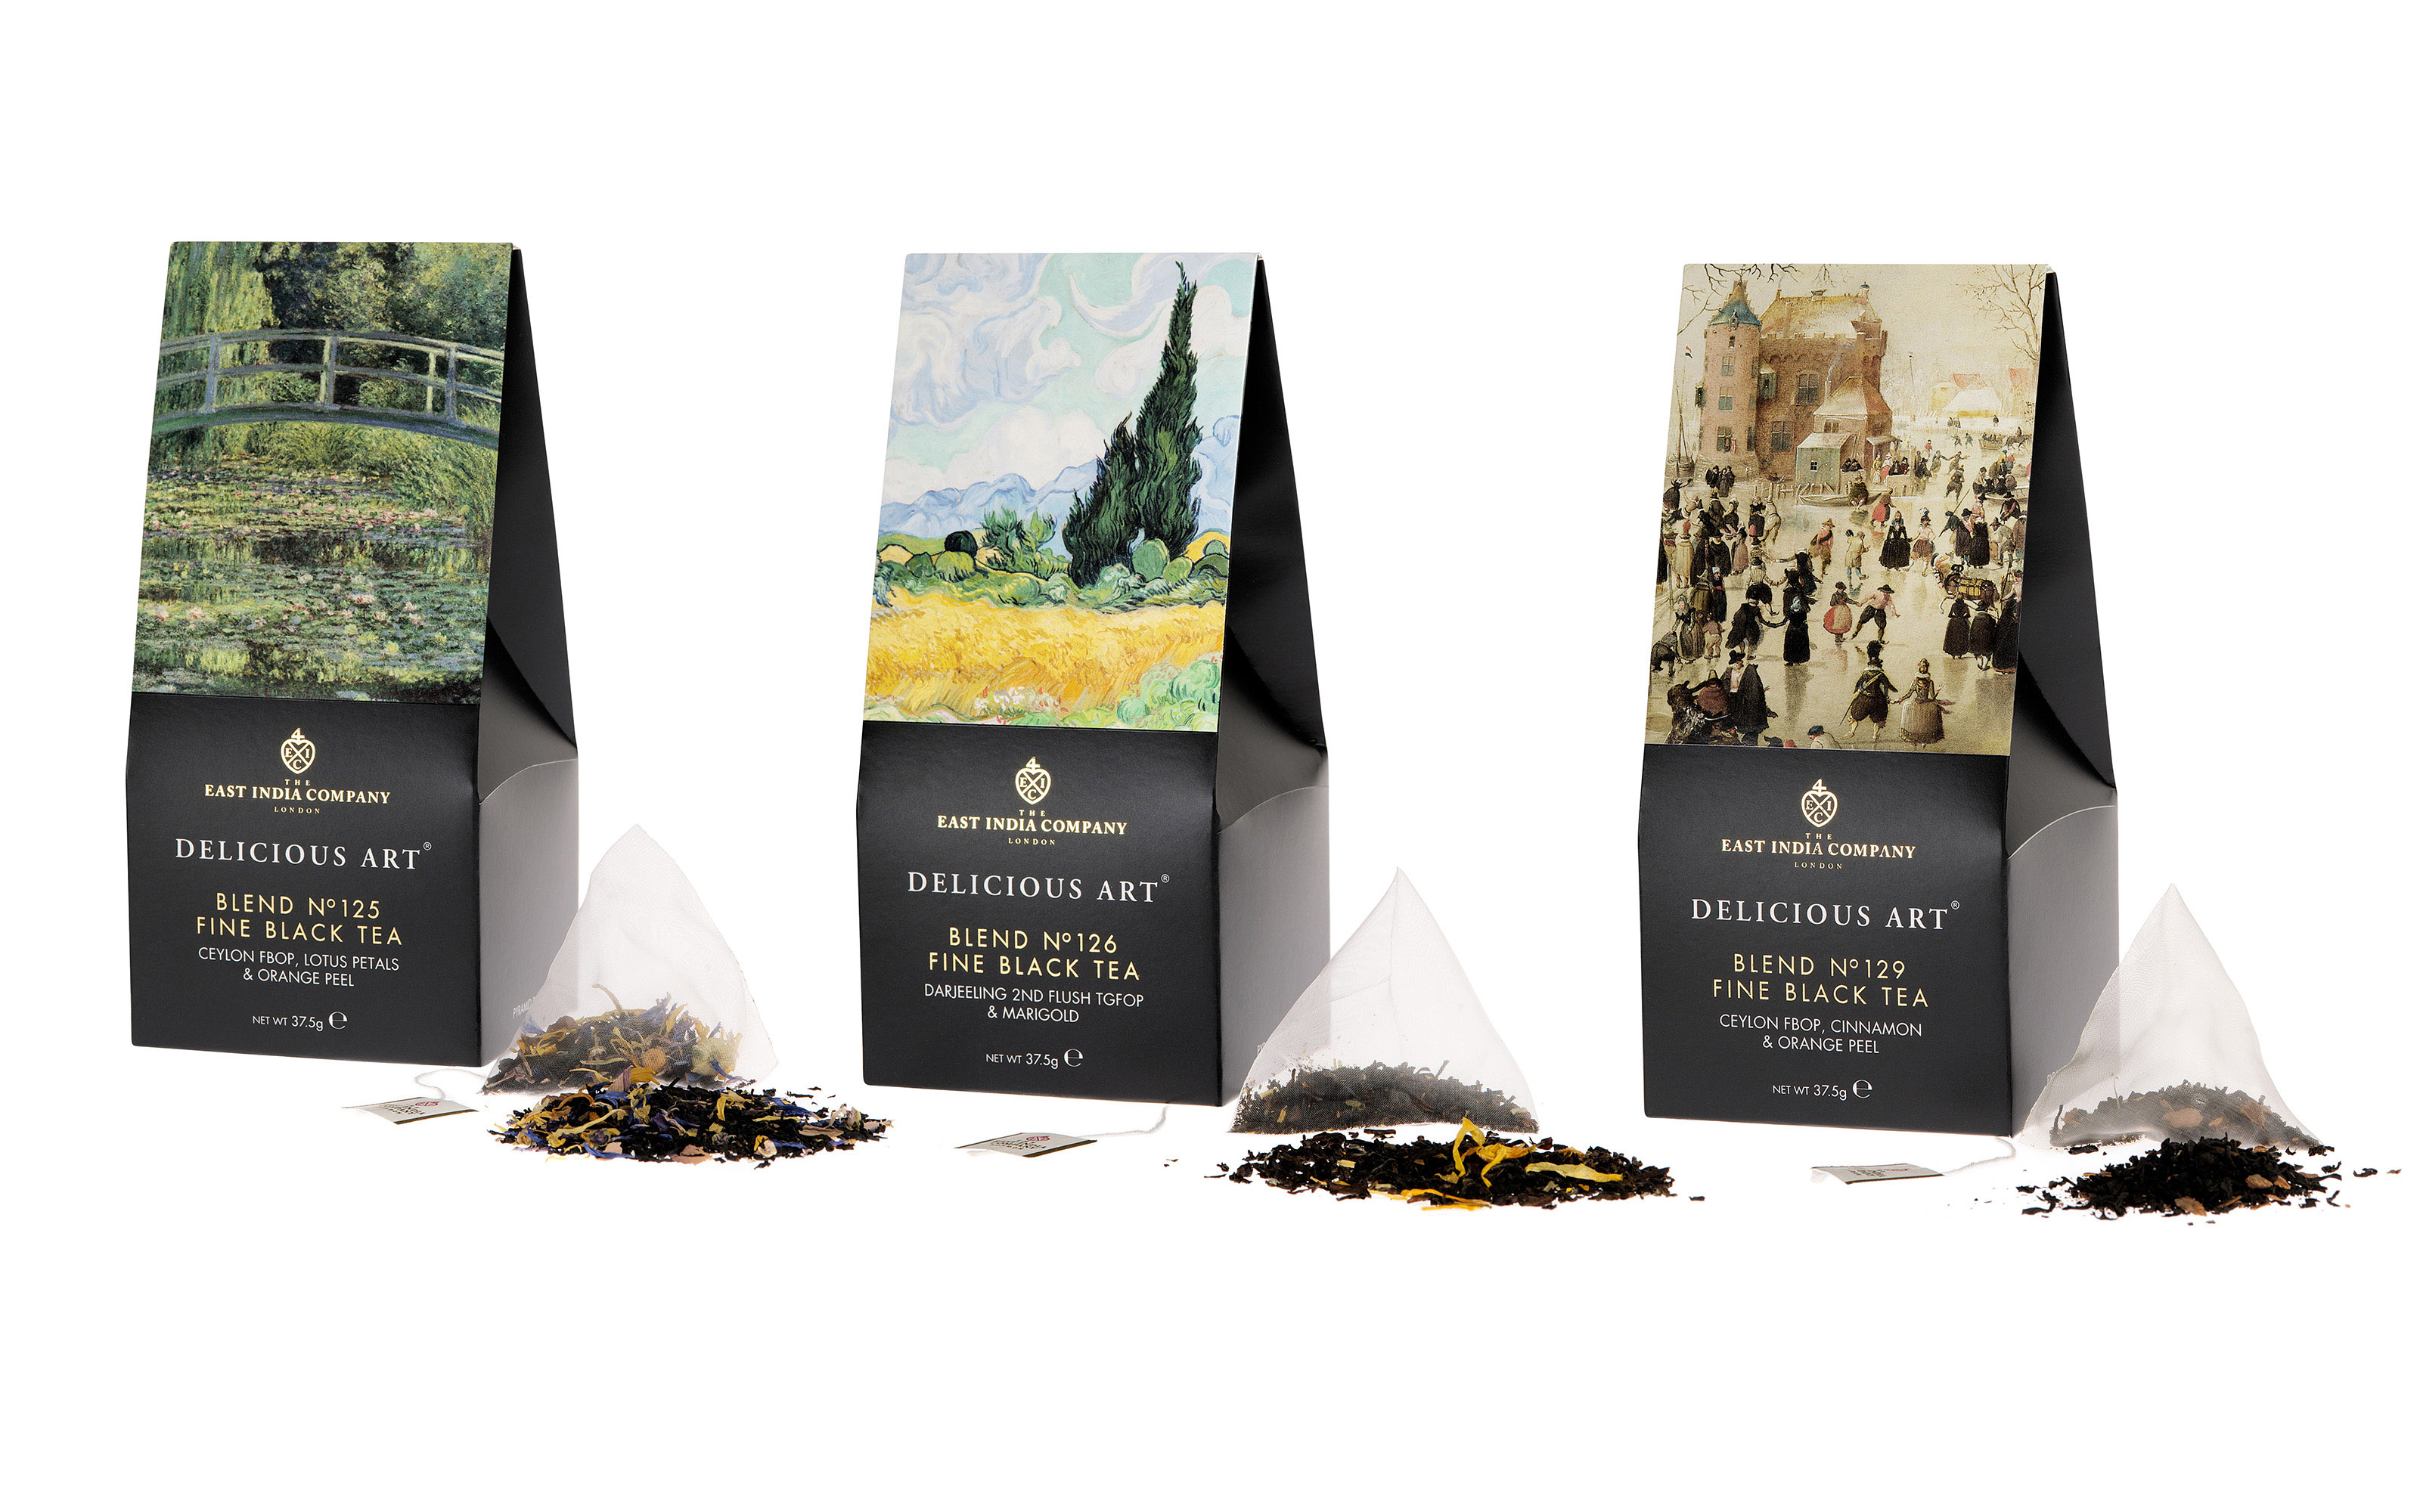 Expanded pack shots, tea and tea bags, photography